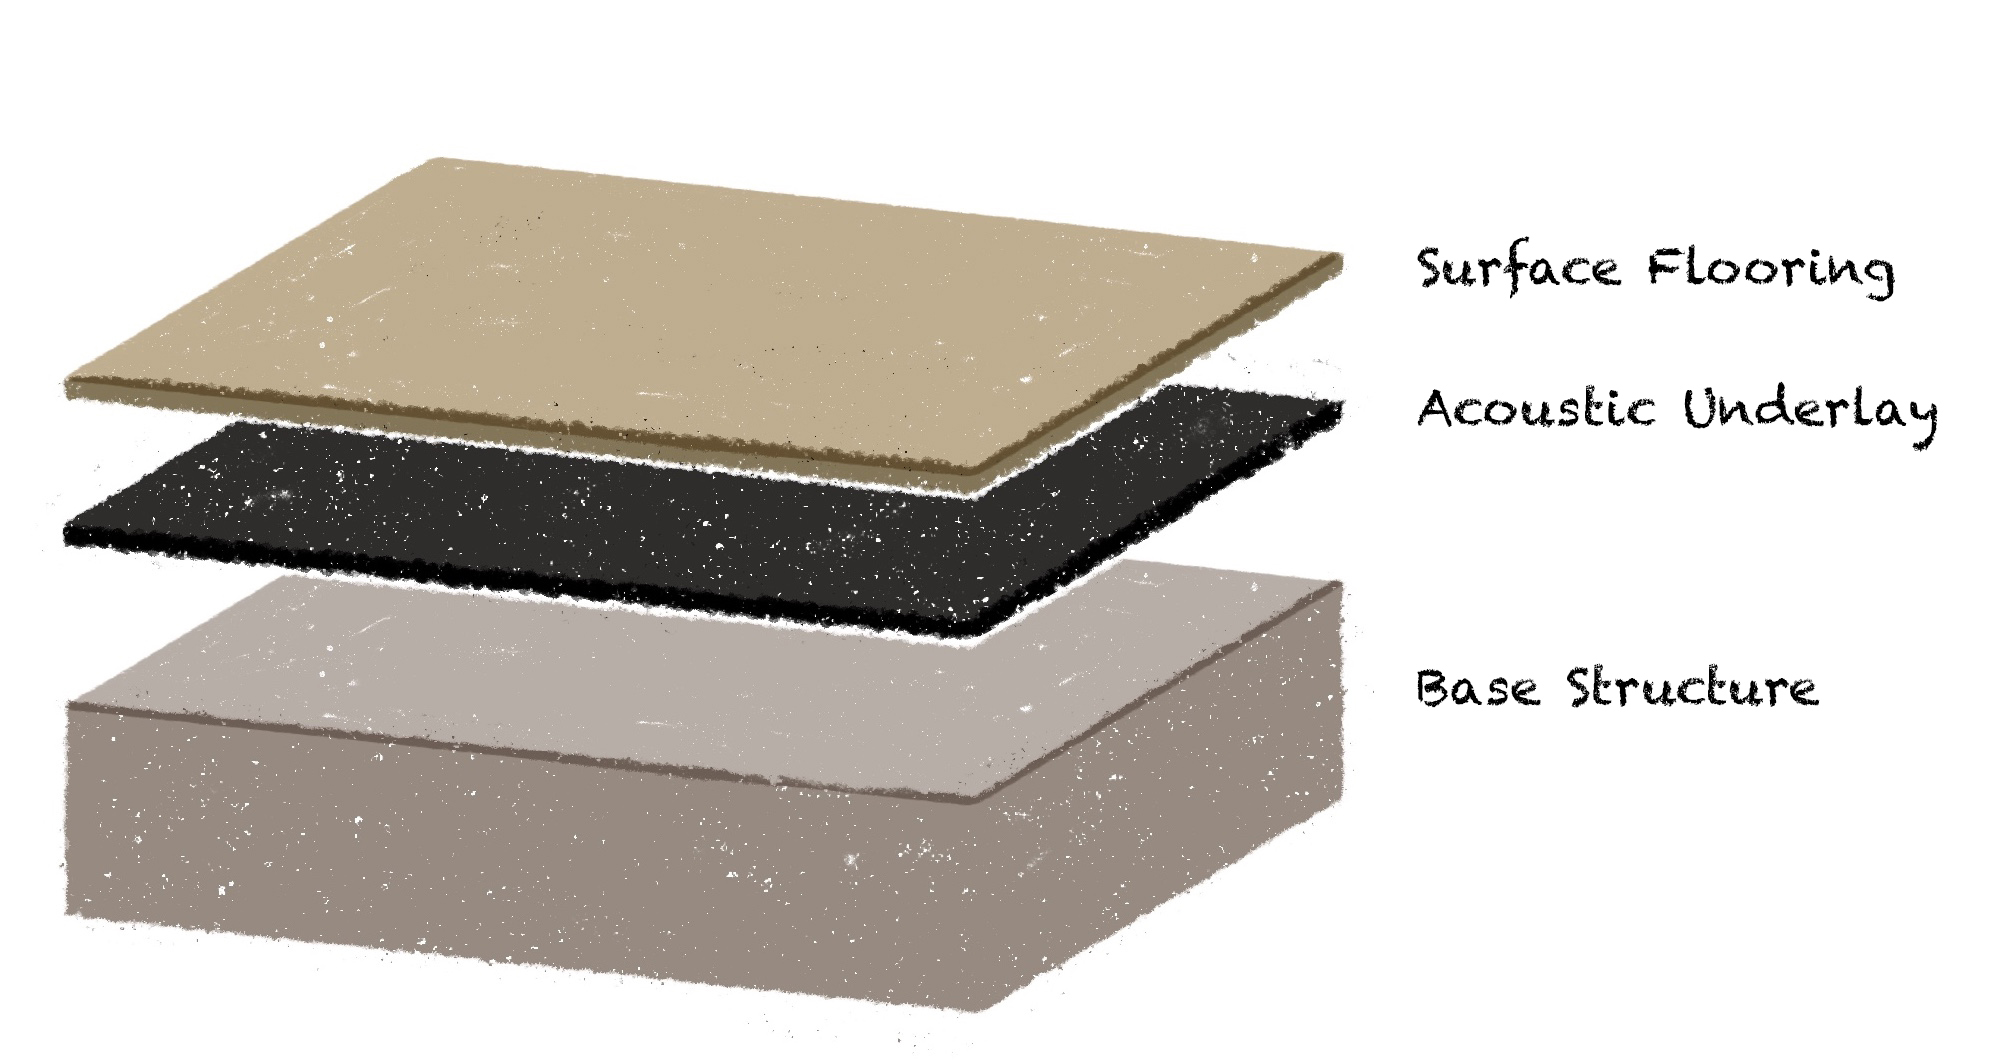 Rubber Underlayment for Impact Sound Control